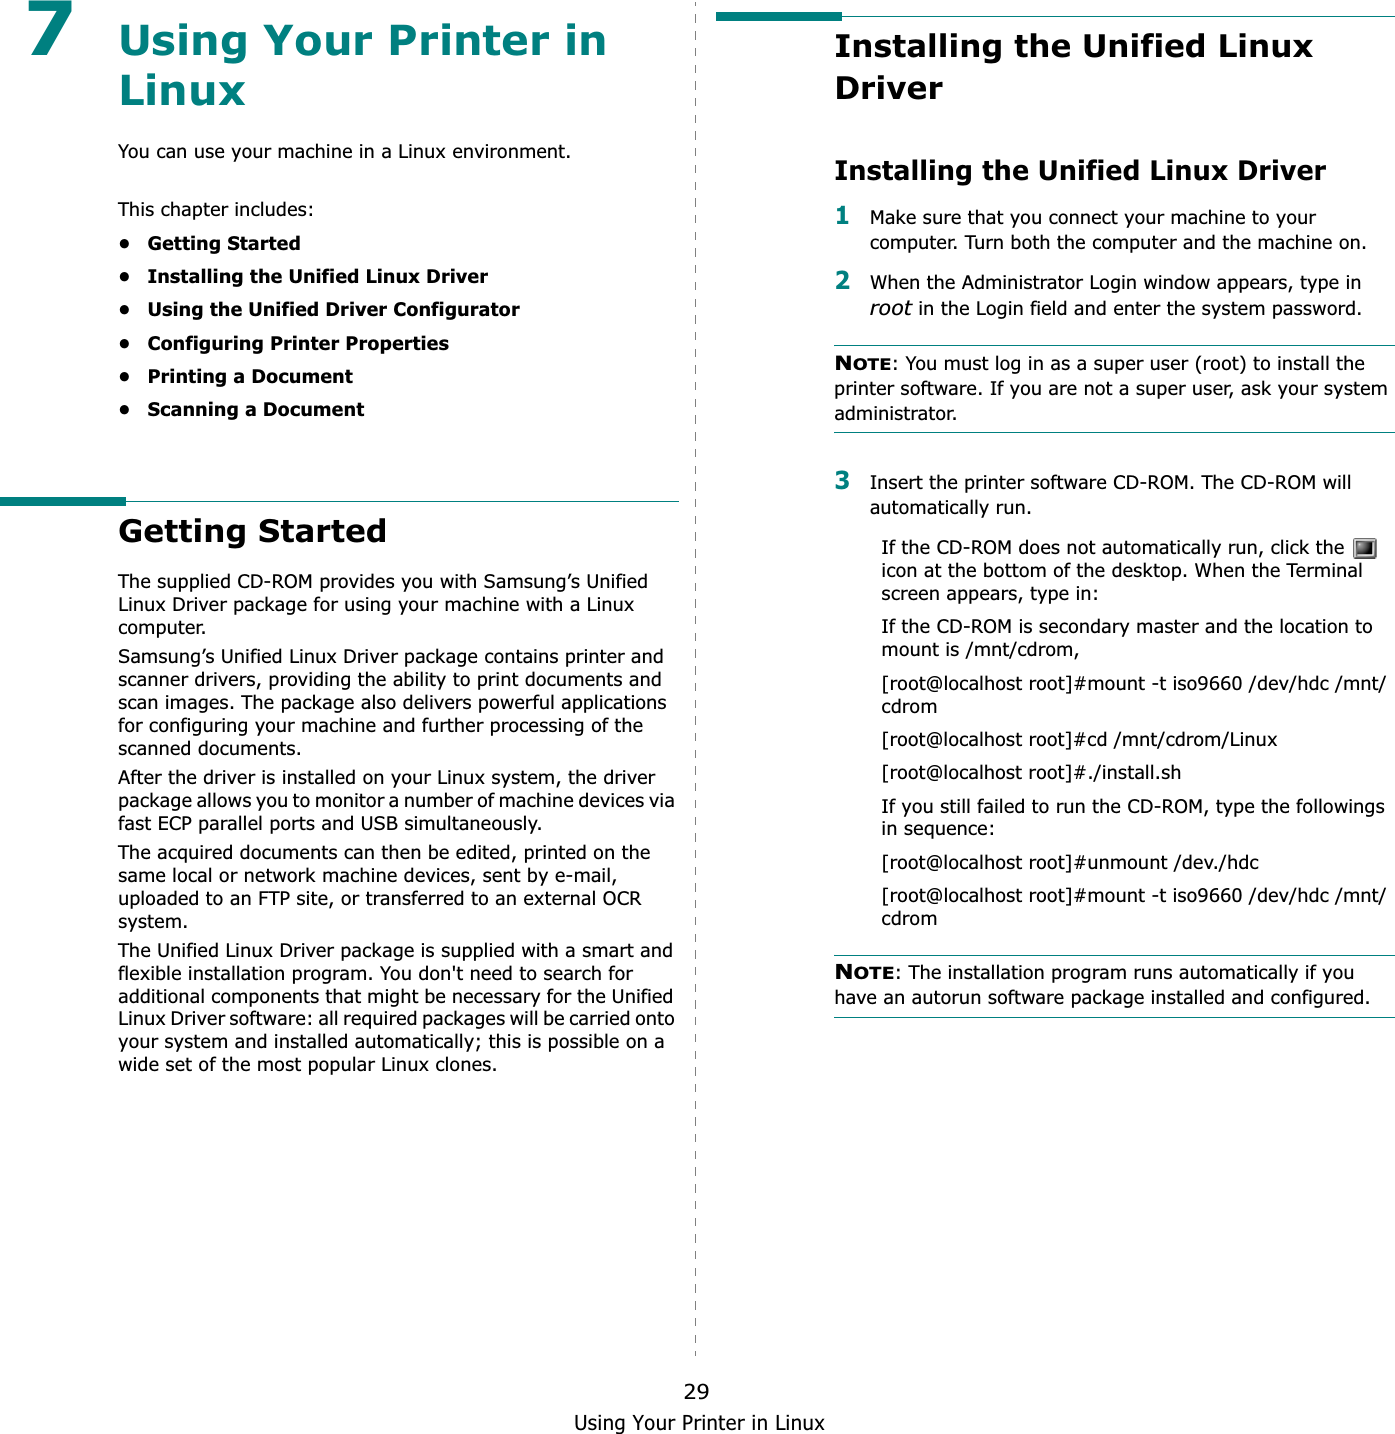 Using Your Printer in Linux297Using Your Printer in LinuxYou can use your machine in a Linux environment. This chapter includes:• Getting Started• Installing the Unified Linux Driver• Using the Unified Driver Configurator• Configuring Printer Properties• Printing a Document• Scanning a DocumentGetting StartedThe supplied CD-ROM provides you with Samsung’s Unified Linux Driver package for using your machine with a Linux computer.Samsung’s Unified Linux Driver package contains printer and scanner drivers, providing the ability to print documents and scan images. The package also delivers powerful applications for configuring your machine and further processing of the scanned documents.After the driver is installed on your Linux system, the driver package allows you to monitor a number of machine devices via fast ECP parallel ports and USB simultaneously. The acquired documents can then be edited, printed on the same local or network machine devices, sent by e-mail, uploaded to an FTP site, or transferred to an external OCR system.The Unified Linux Driver package is supplied with a smart and flexible installation program. You don&apos;t need to search for additional components that might be necessary for the Unified Linux Driver software: all required packages will be carried onto your system and installed automatically; this is possible on a wide set of the most popular Linux clones.Installing the Unified Linux DriverInstalling the Unified Linux Driver1Make sure that you connect your machine to your computer. Turn both the computer and the machine on.2When the Administrator Login window appears, type in root in the Login field and enter the system password.NOTE: You must log in as a super user (root) to install the printer software. If you are not a super user, ask your system administrator.3Insert the printer software CD-ROM. The CD-ROM will automatically run.If the CD-ROM does not automatically run, click the   icon at the bottom of the desktop. When the Terminal screen appears, type in:If the CD-ROM is secondary master and the location to mount is /mnt/cdrom,[root@localhost root]#mount -t iso9660 /dev/hdc /mnt/cdrom[root@localhost root]#cd /mnt/cdrom/Linux[root@localhost root]#./install.sh If you still failed to run the CD-ROM, type the followings in sequence:[root@localhost root]#unmount /dev./hdc[root@localhost root]#mount -t iso9660 /dev/hdc /mnt/cdromNOTE: The installation program runs automatically if you have an autorun software package installed and configured.